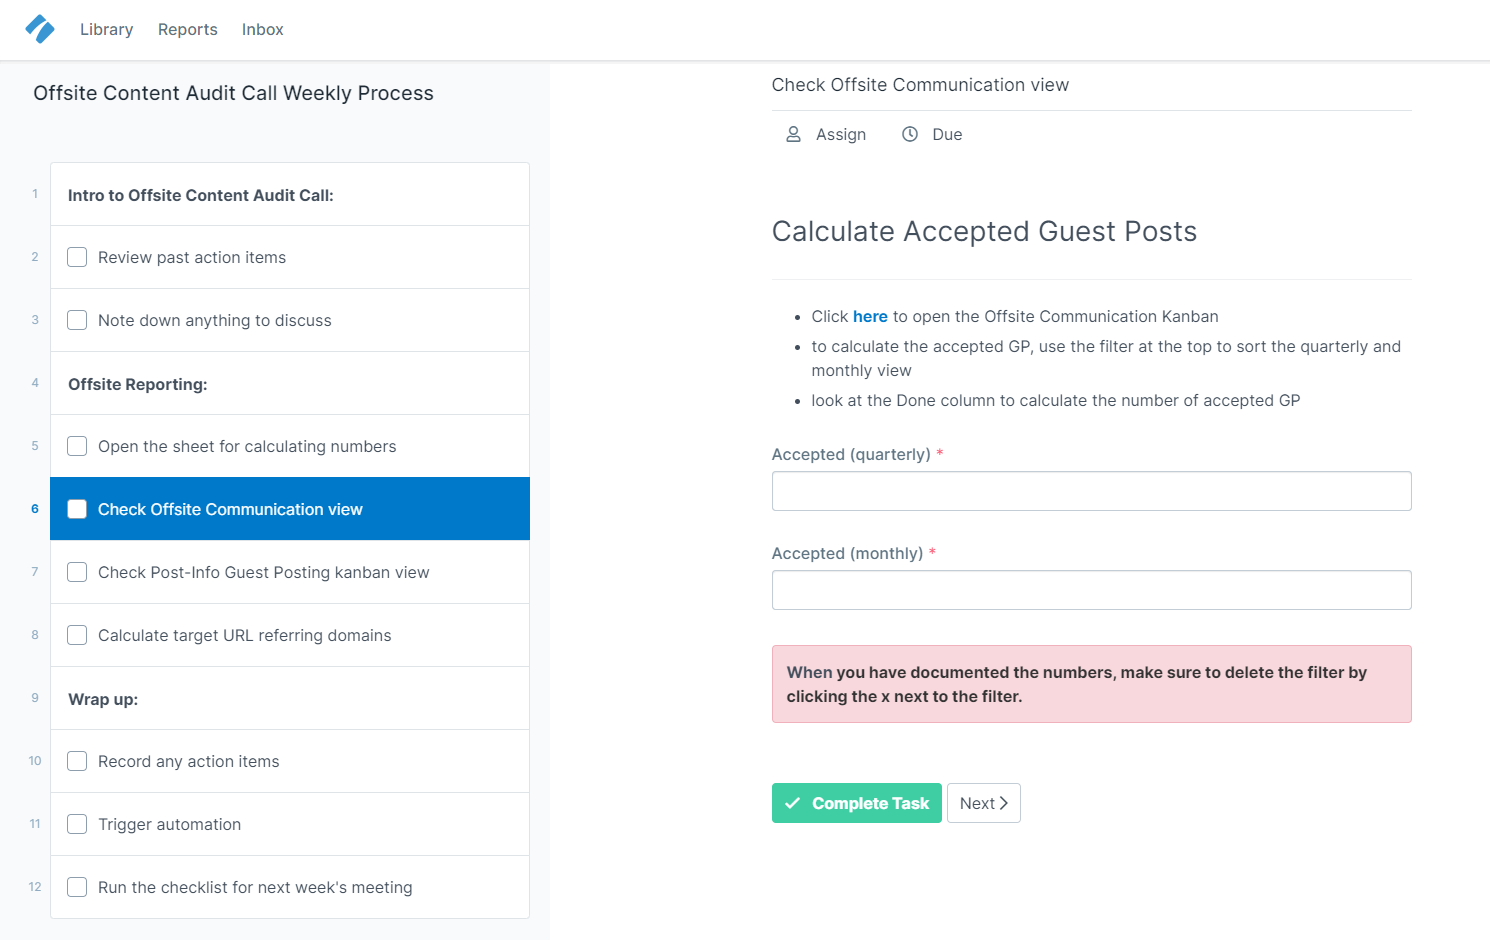 How We Use Automations for Marketing Operations Reporting